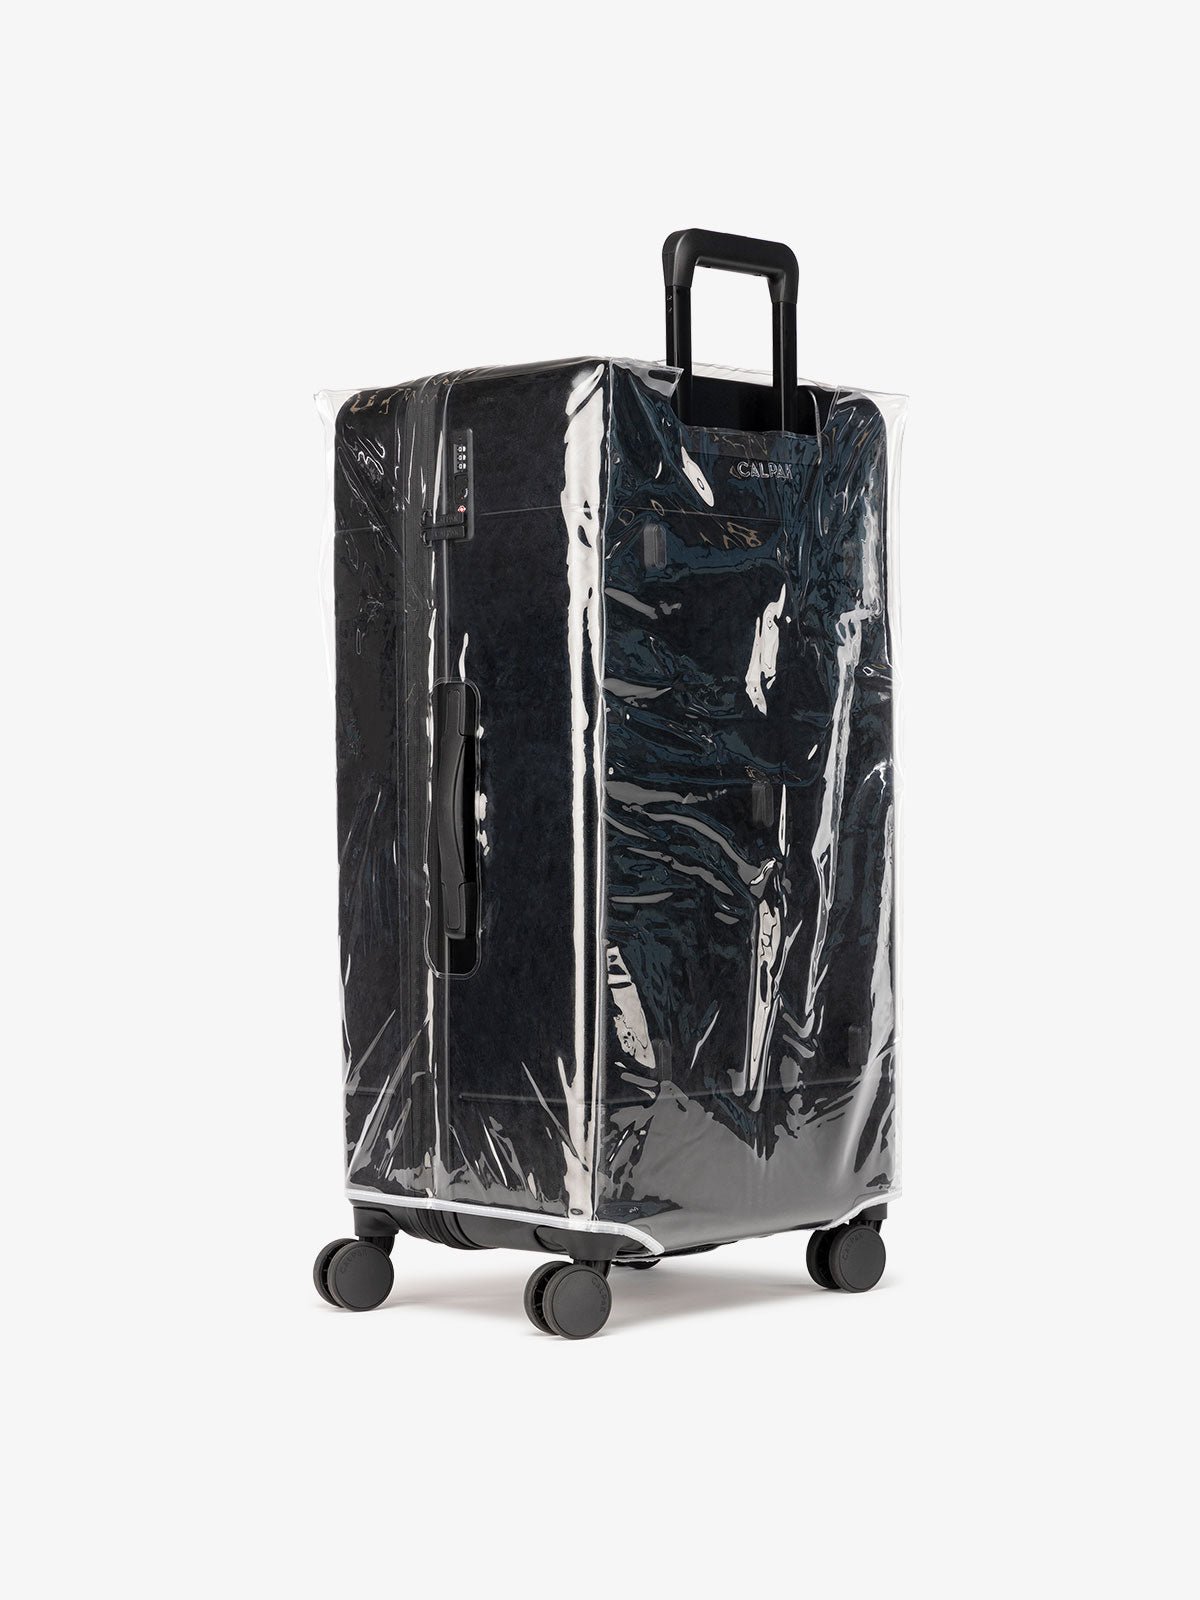 CALPAK transparent plastic cover for trunk 30 inch spinner luggage